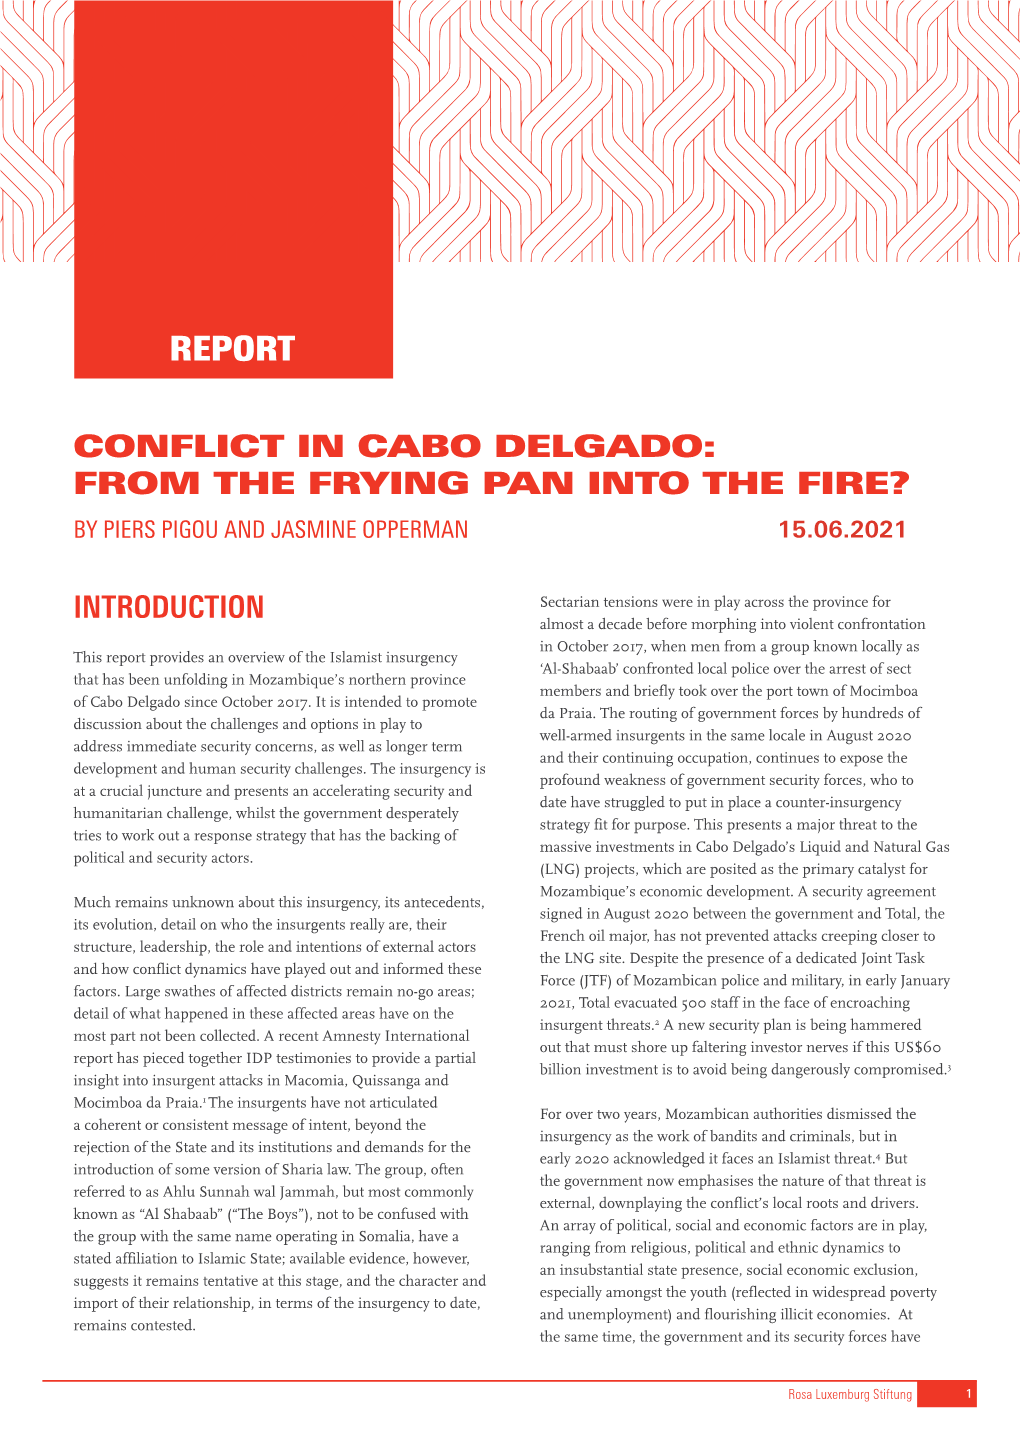 Conflict in Cabo Delgado: from the Frying Pan Into the Fire? by Piers Pigou and Jasmine Opperman